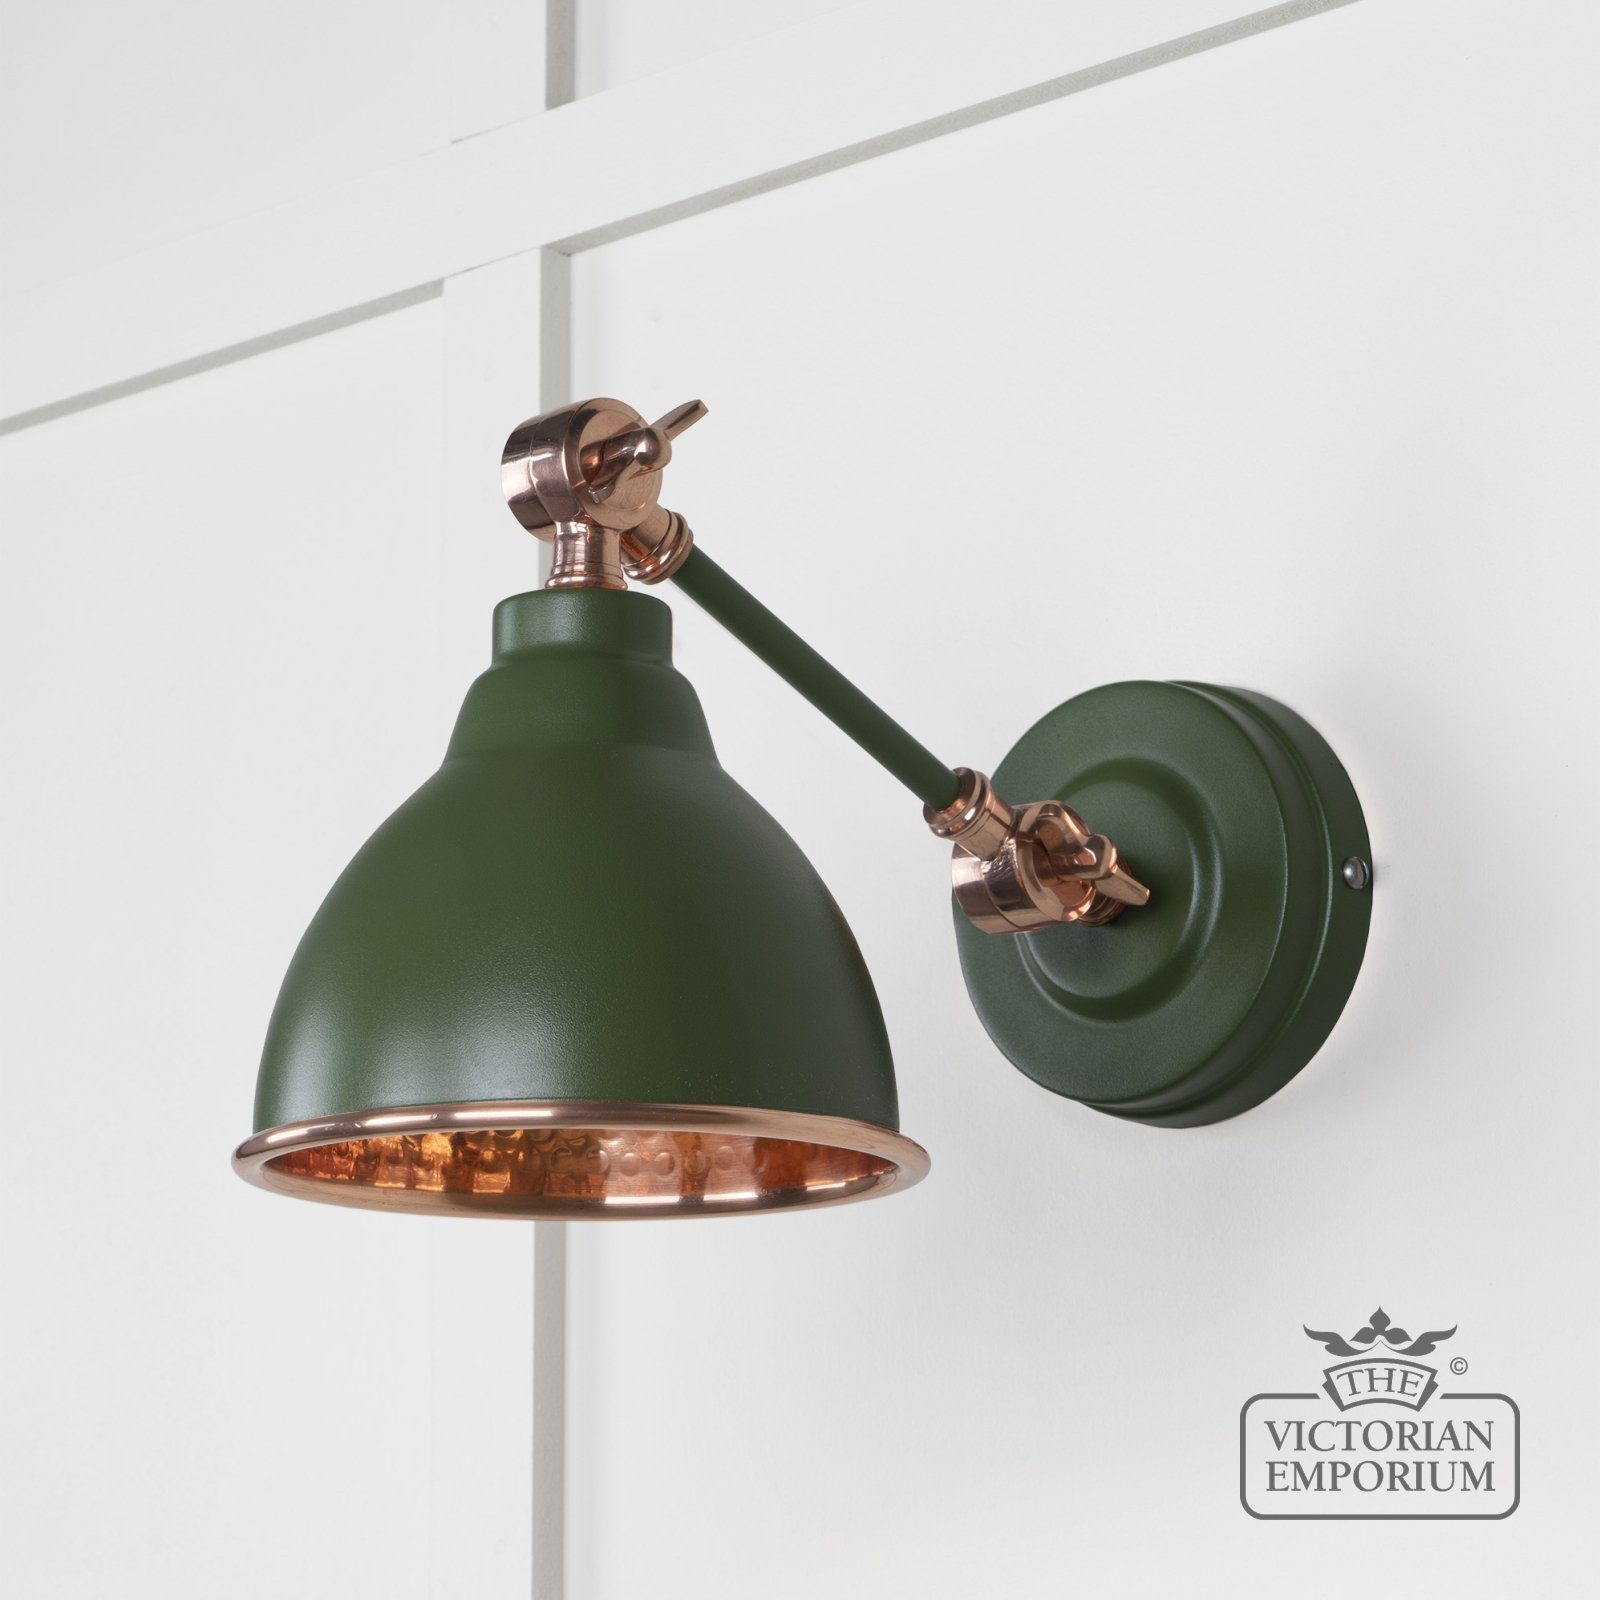 Brindle Wall Light with Hammered Copper Interior and Heath Exterior